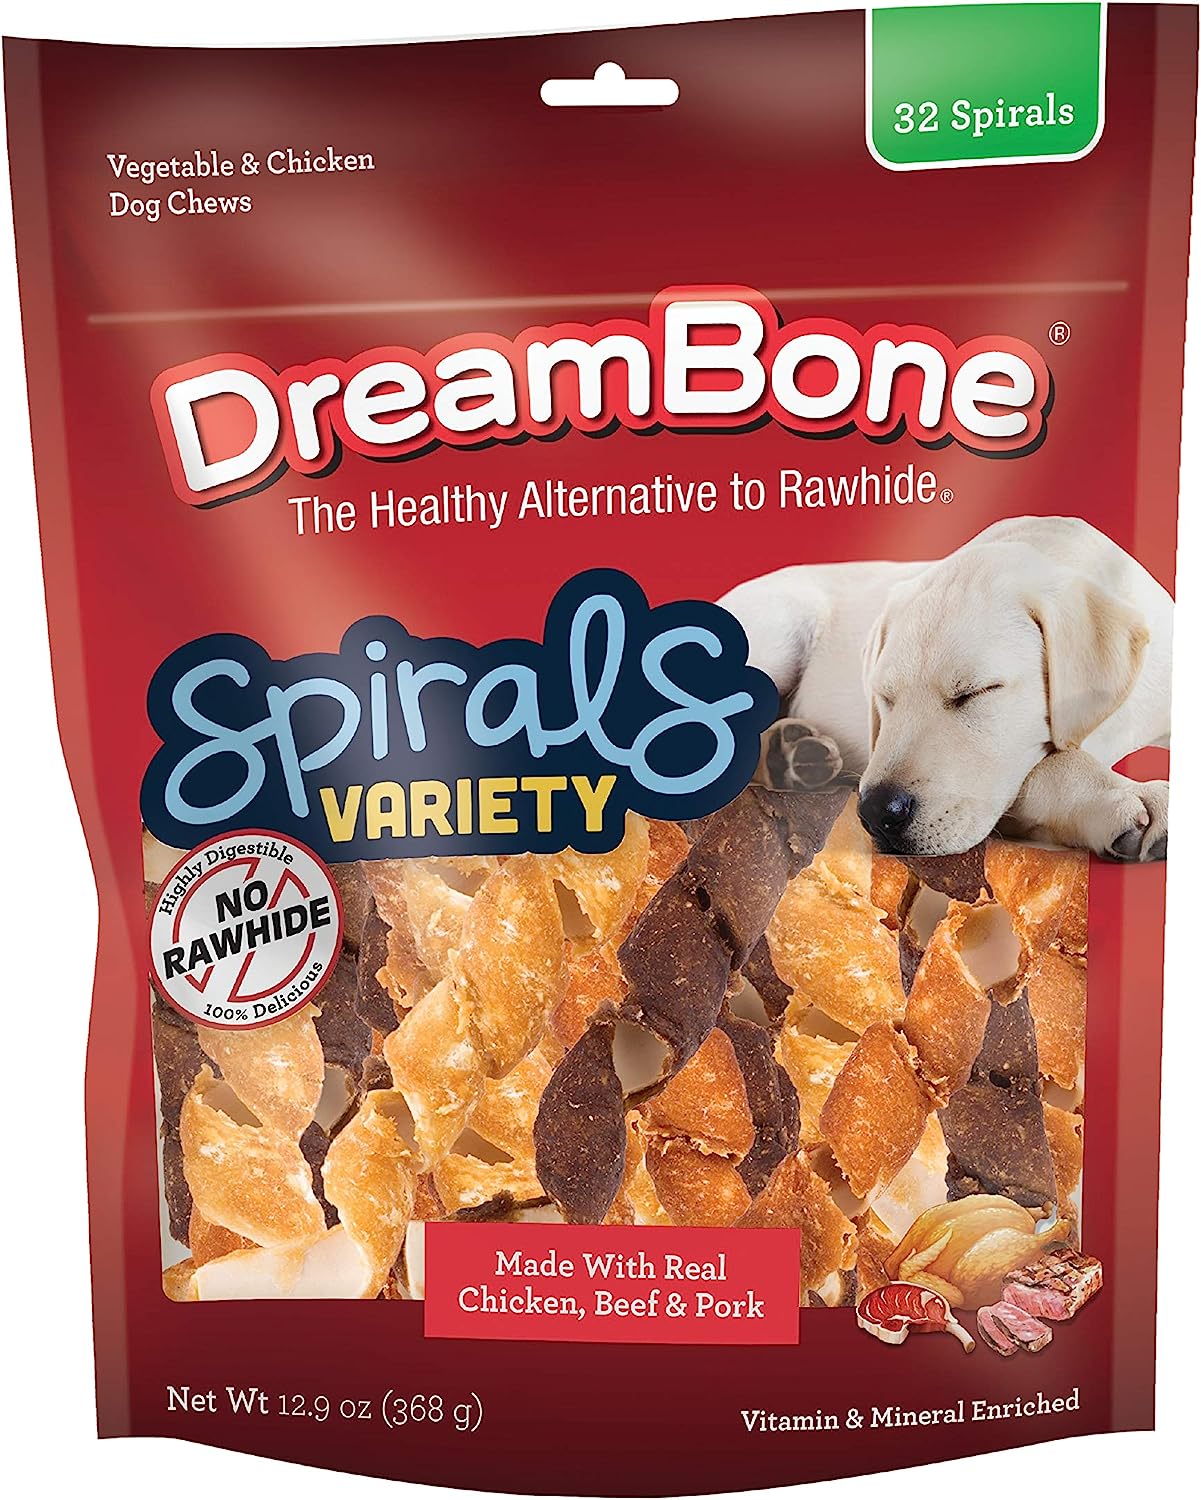 DreamBone Spirals Variety Pack, Treat Your Dog to a Chew Made with Real Meat and Vegetables